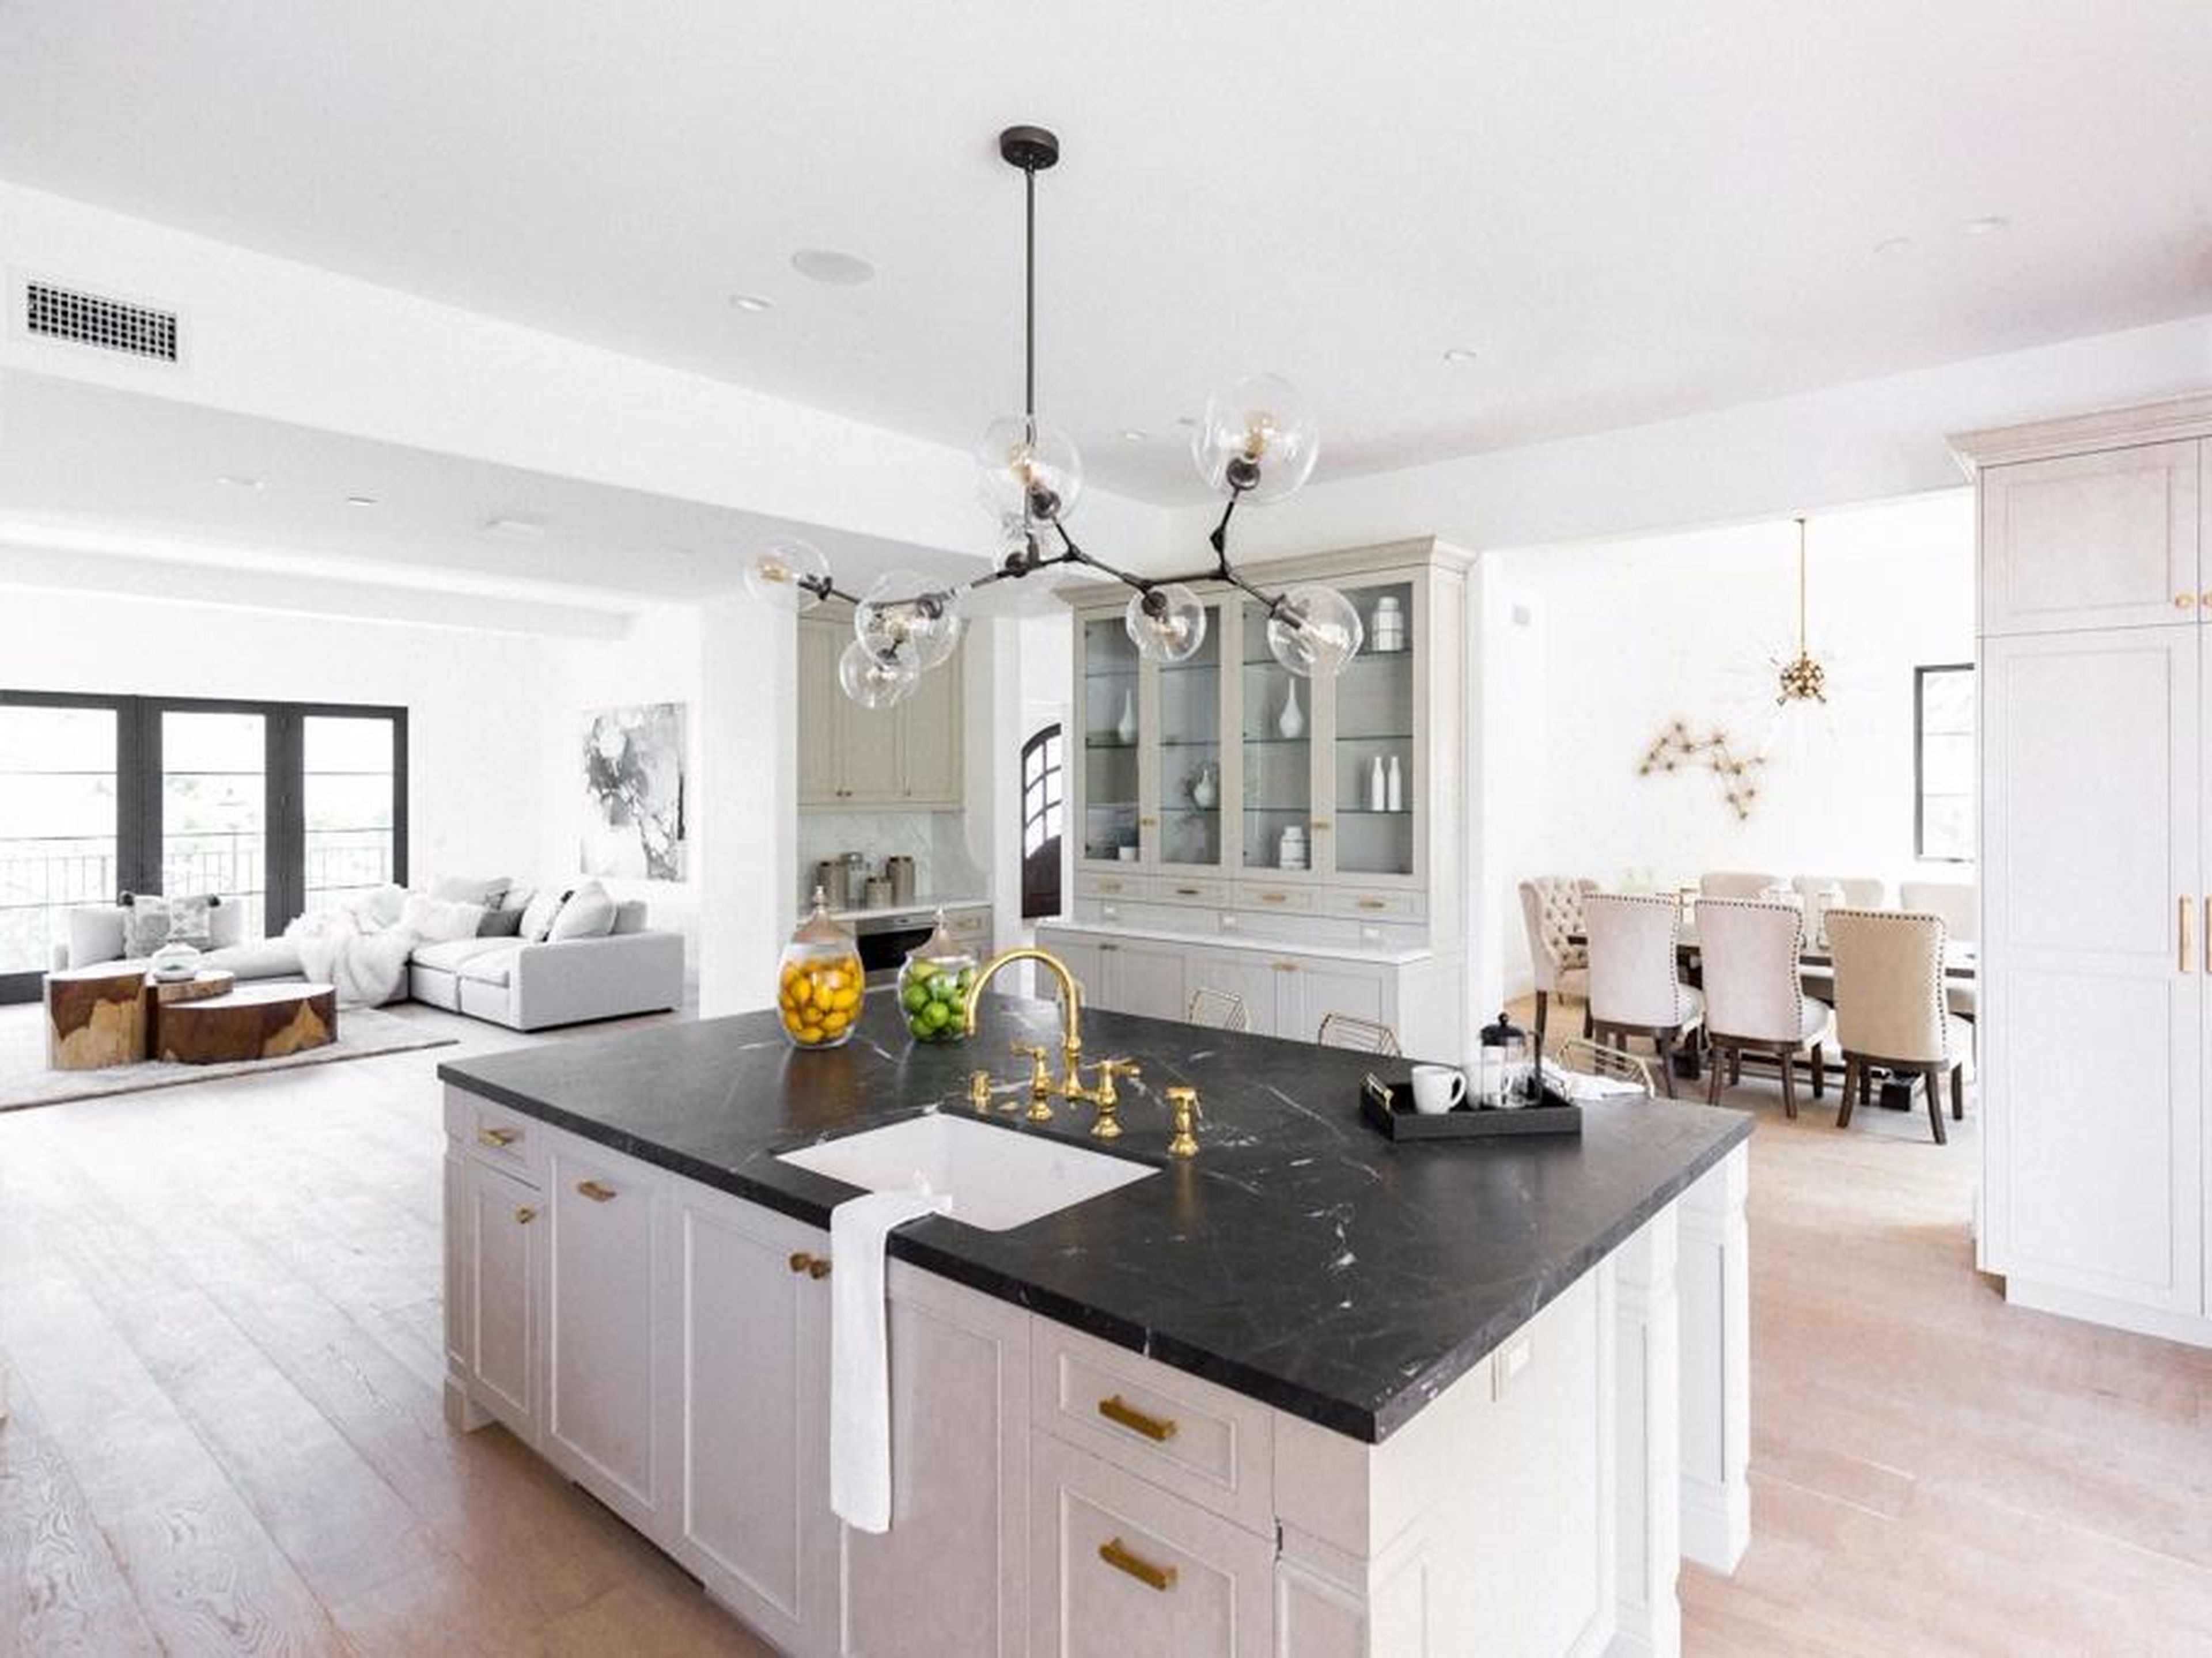 The floors are brushed oak, and the kitchen — which opens out onto a veranda — has marble countertops.